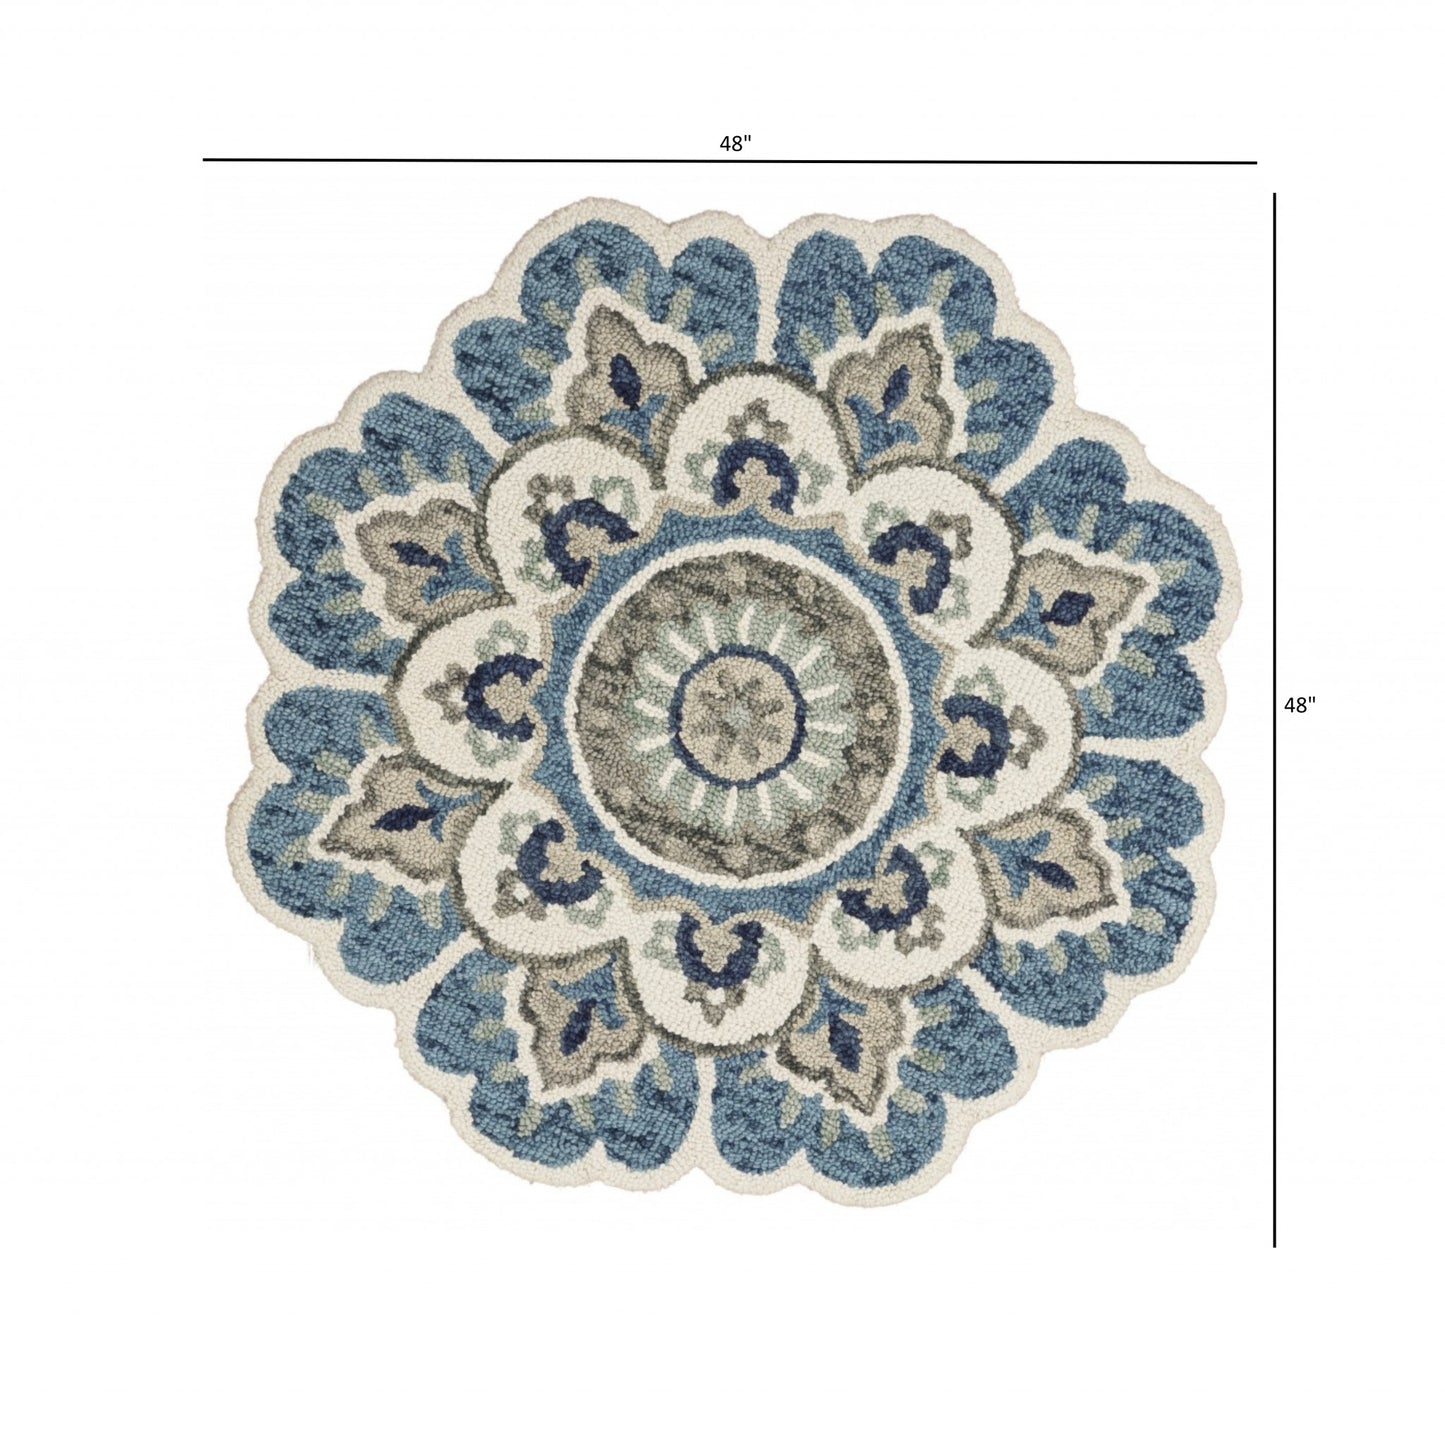 4' Blue and Cream Round Wool Floral Medallion Hand Tufted Area Rug